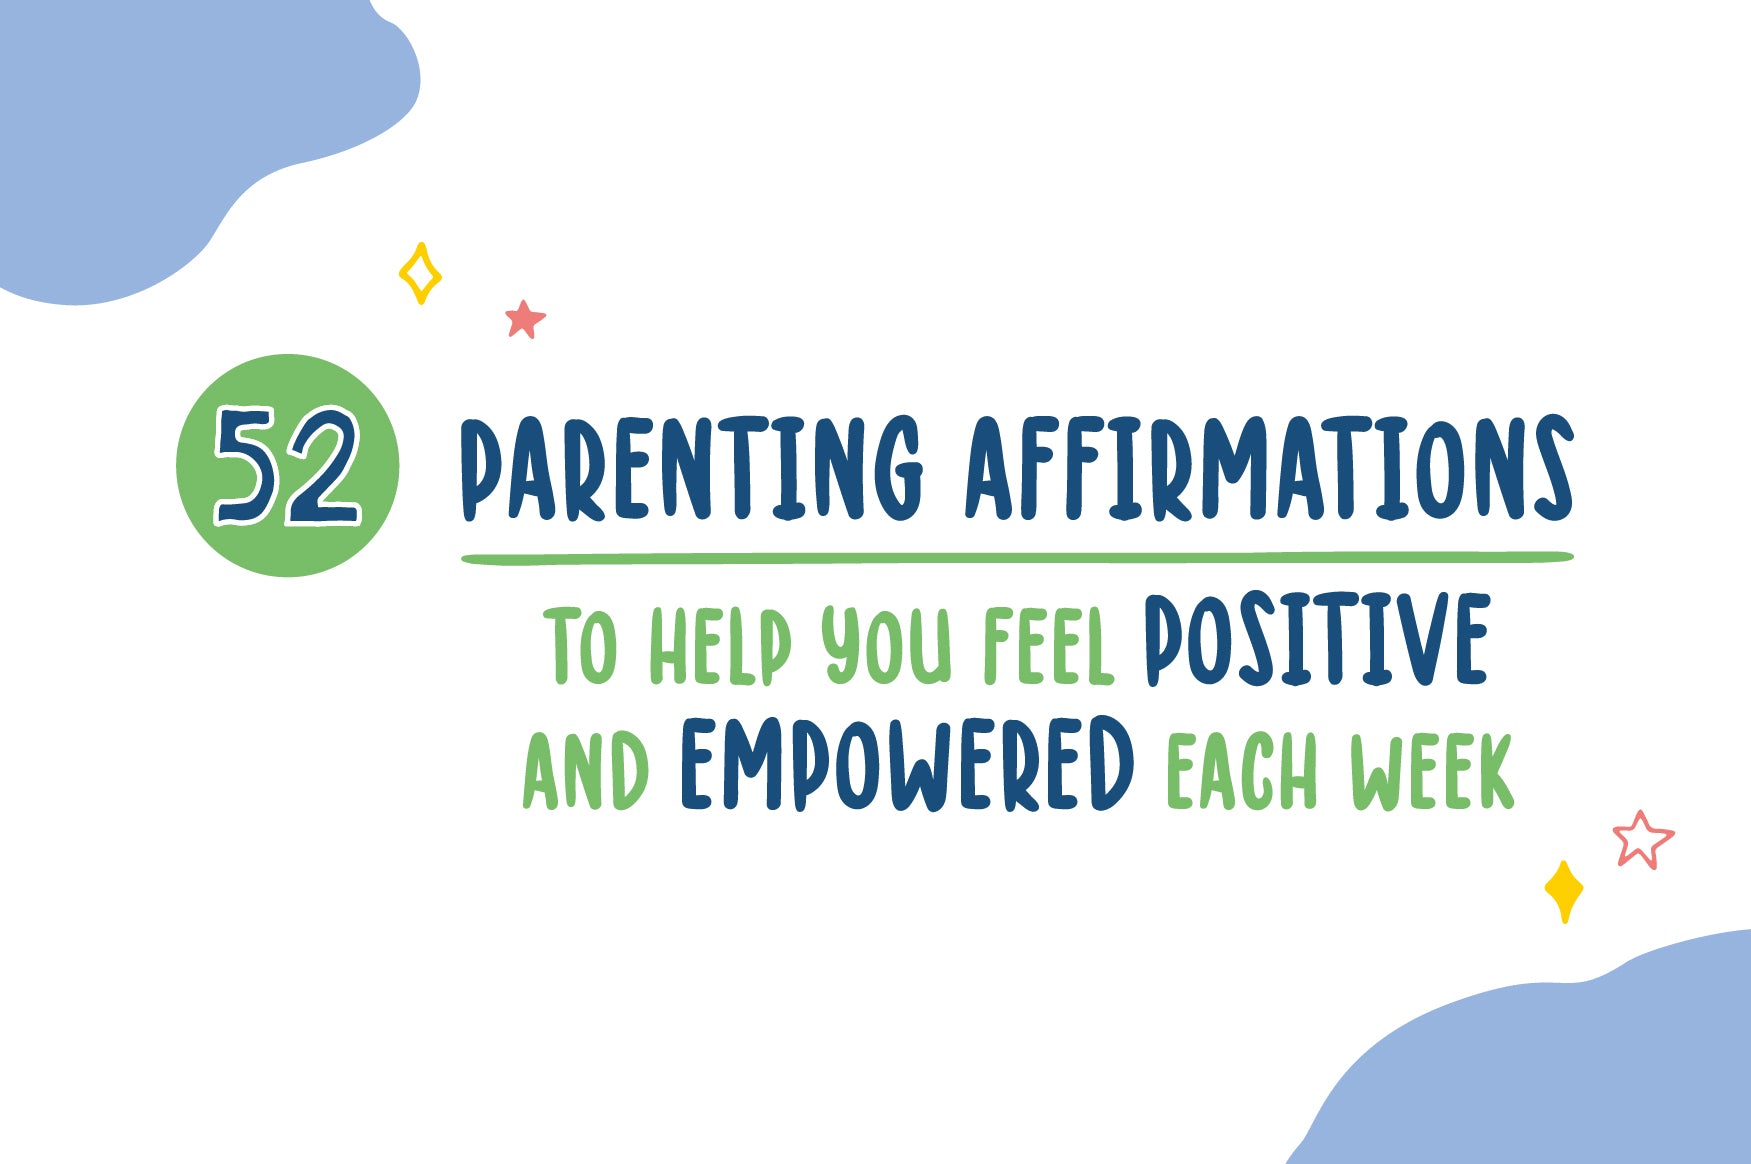 52 Parenting Affirmations to Help You Feel Positive and Empowered Each Week